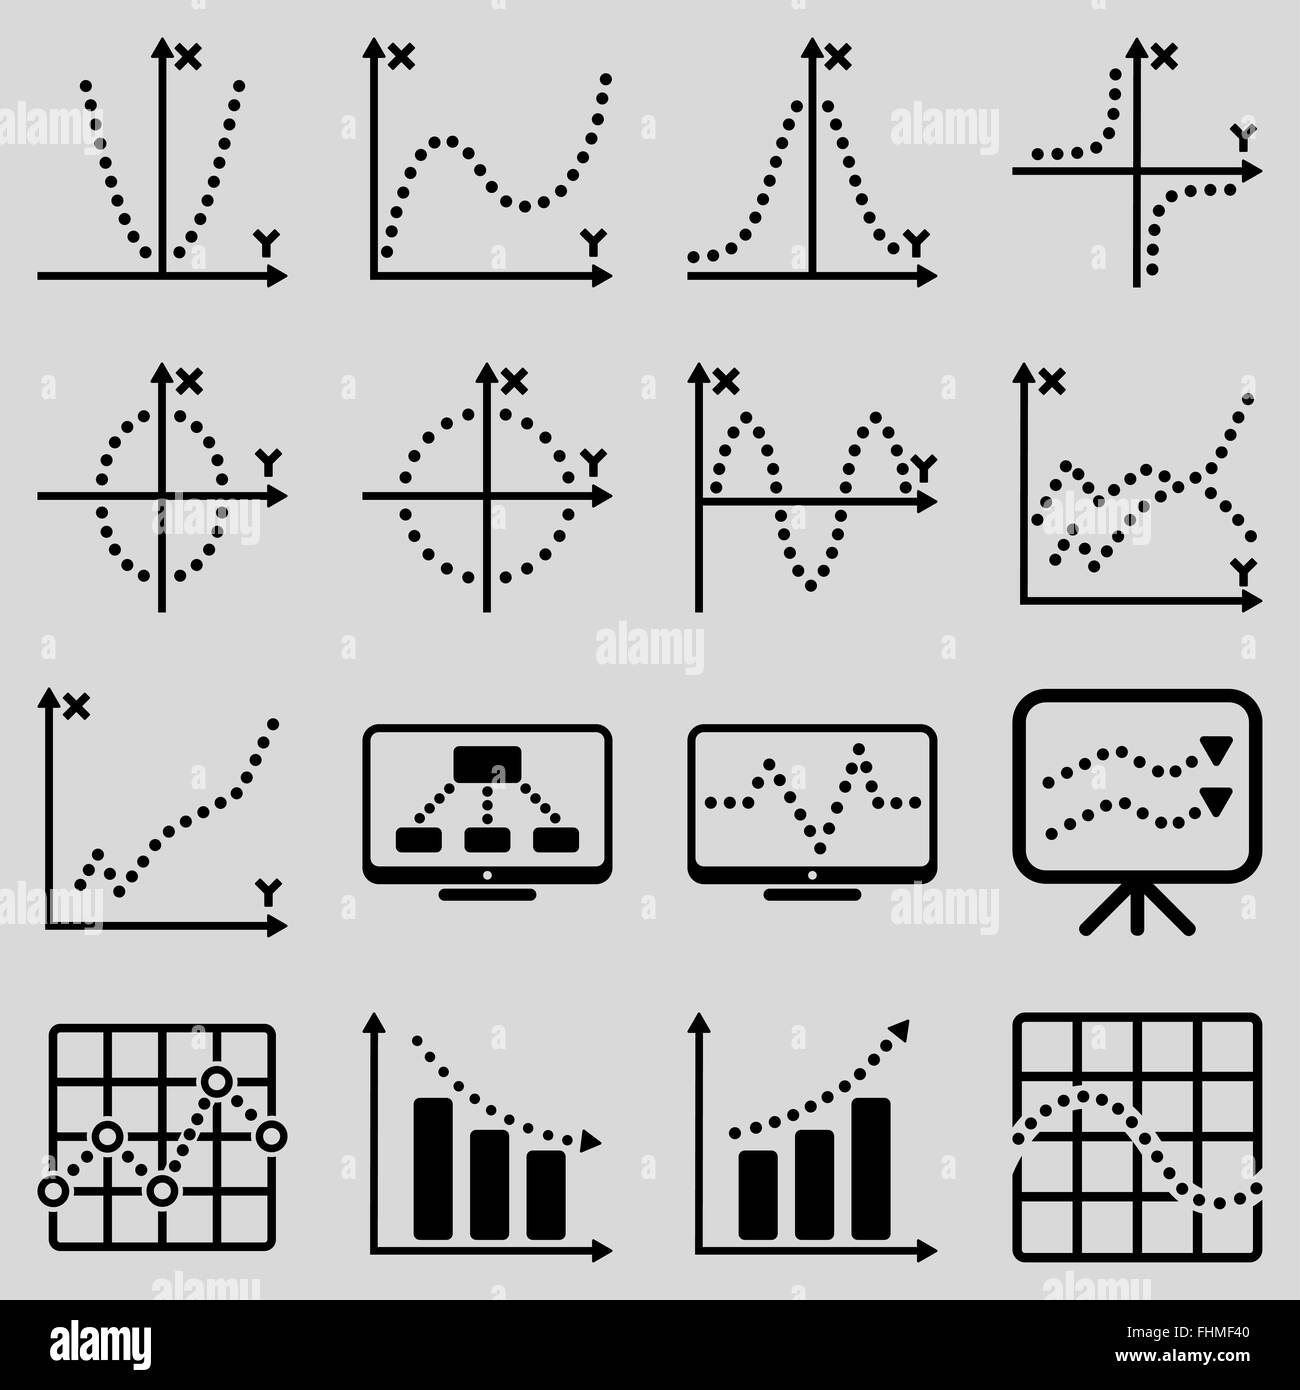 Dotted vector infographic business icons Stock Photo